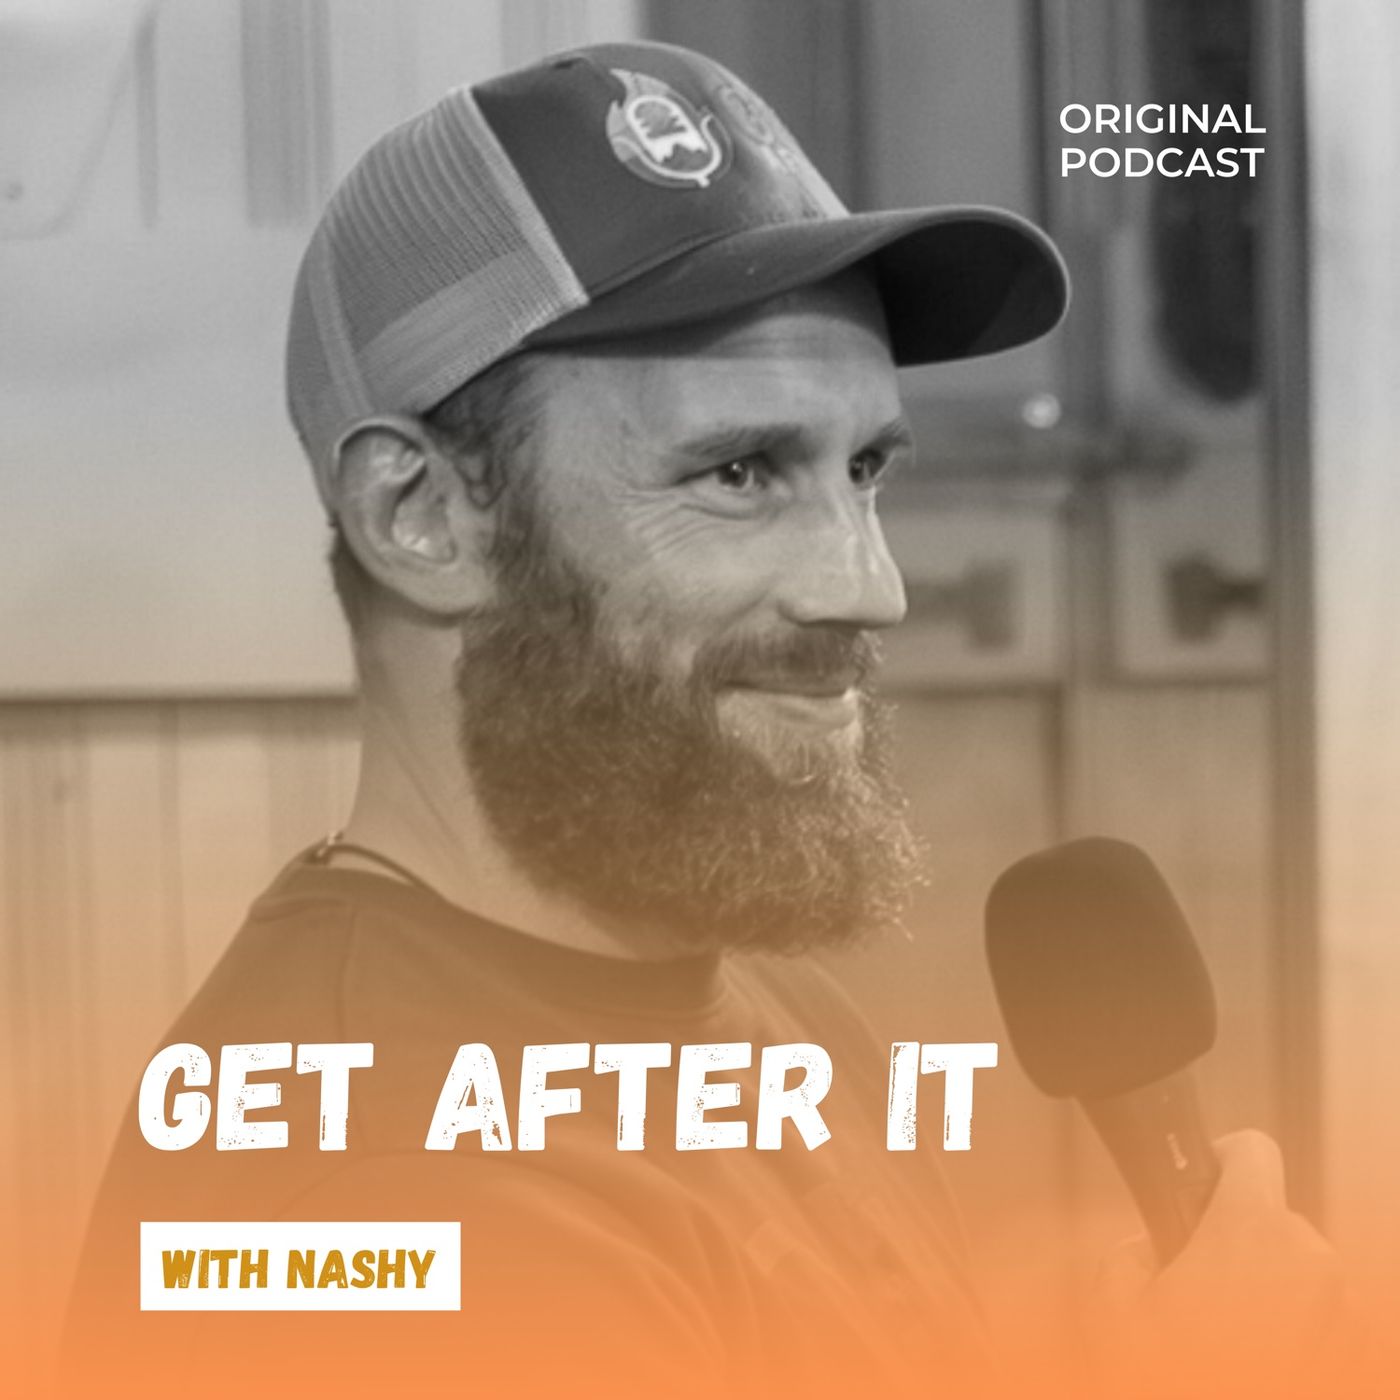 Get After It with Nashy – Podcast